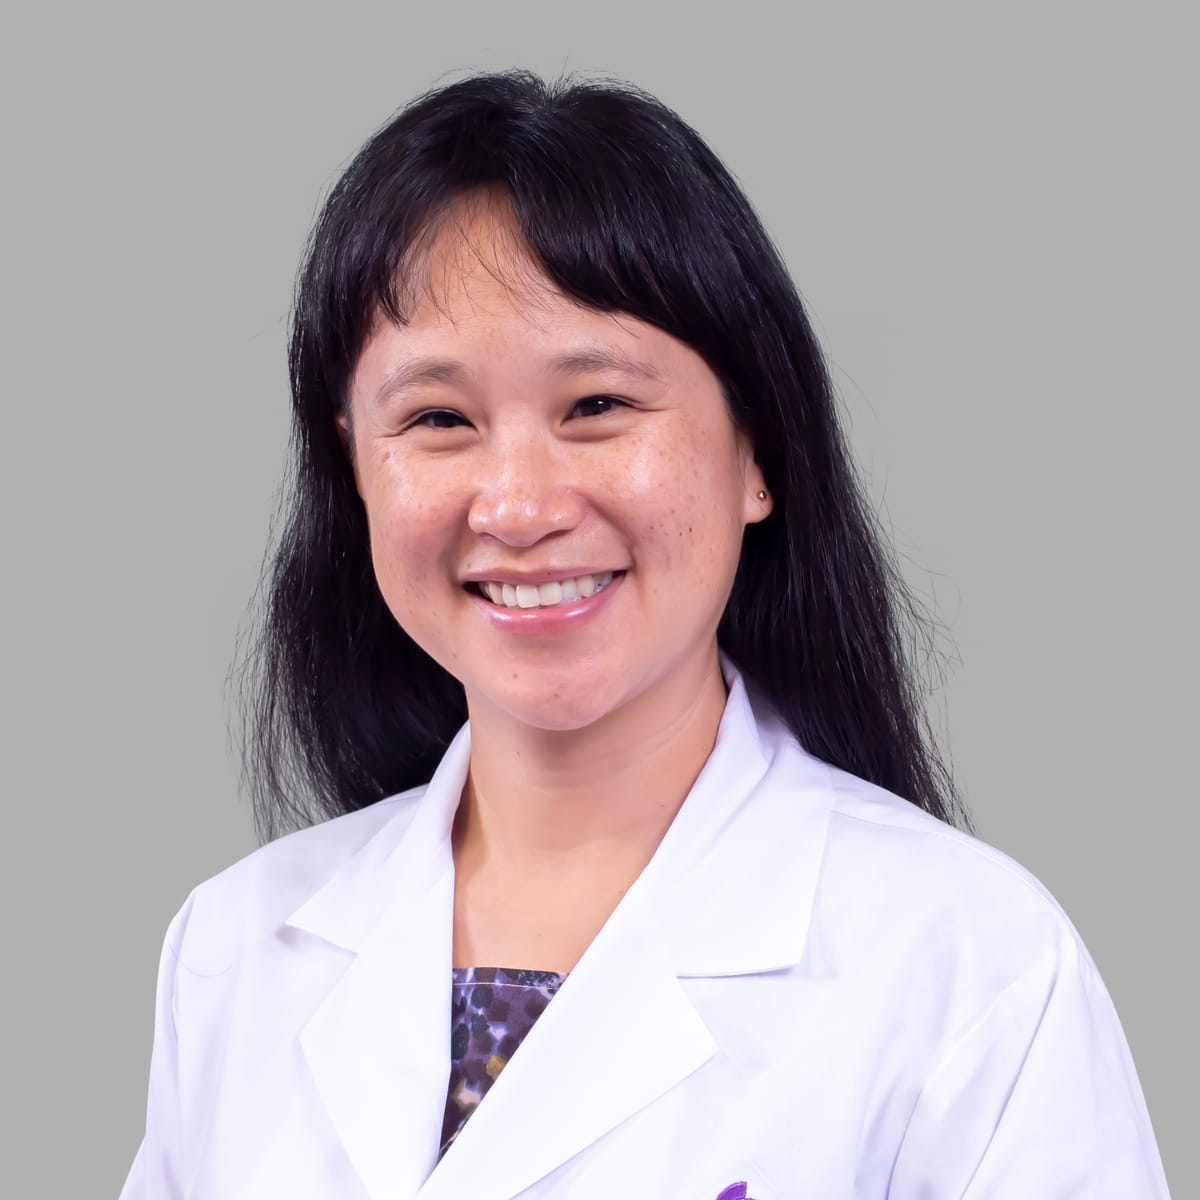 A friendly photo of Angeline Ti, MD